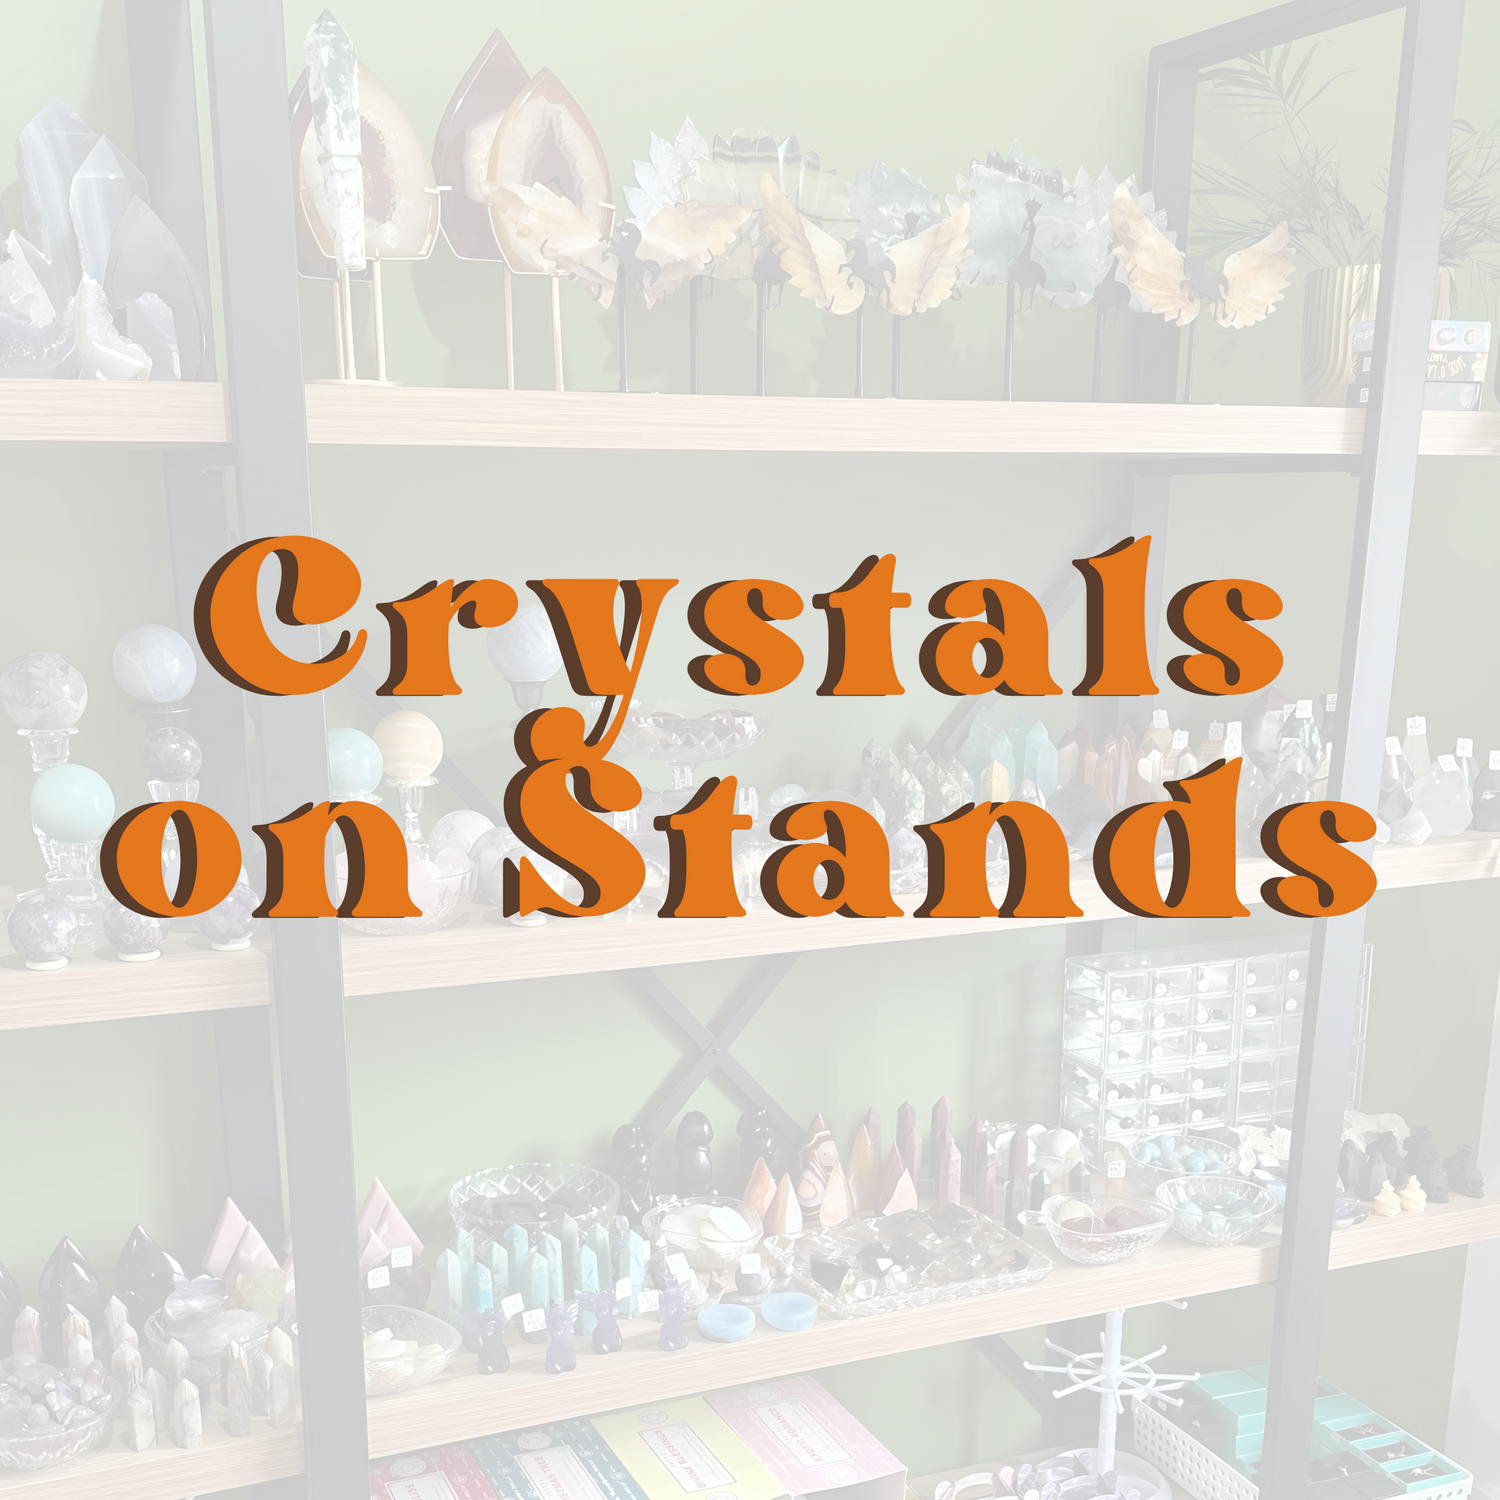 Crystals on Stands